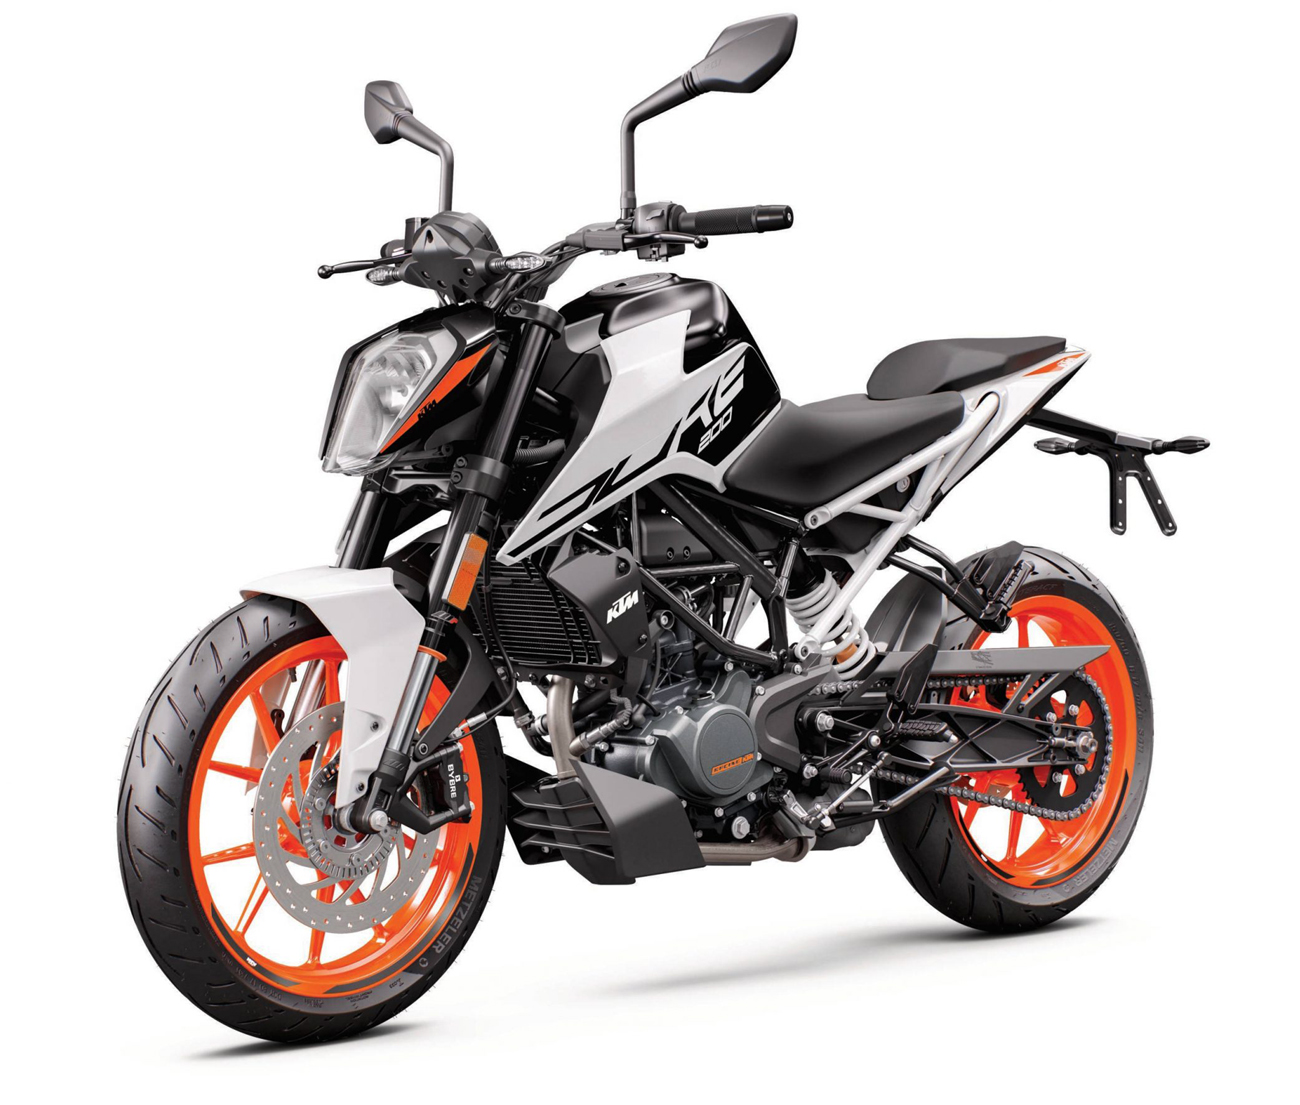 KTM 200 Duke ABS 2020 Technical Specifications